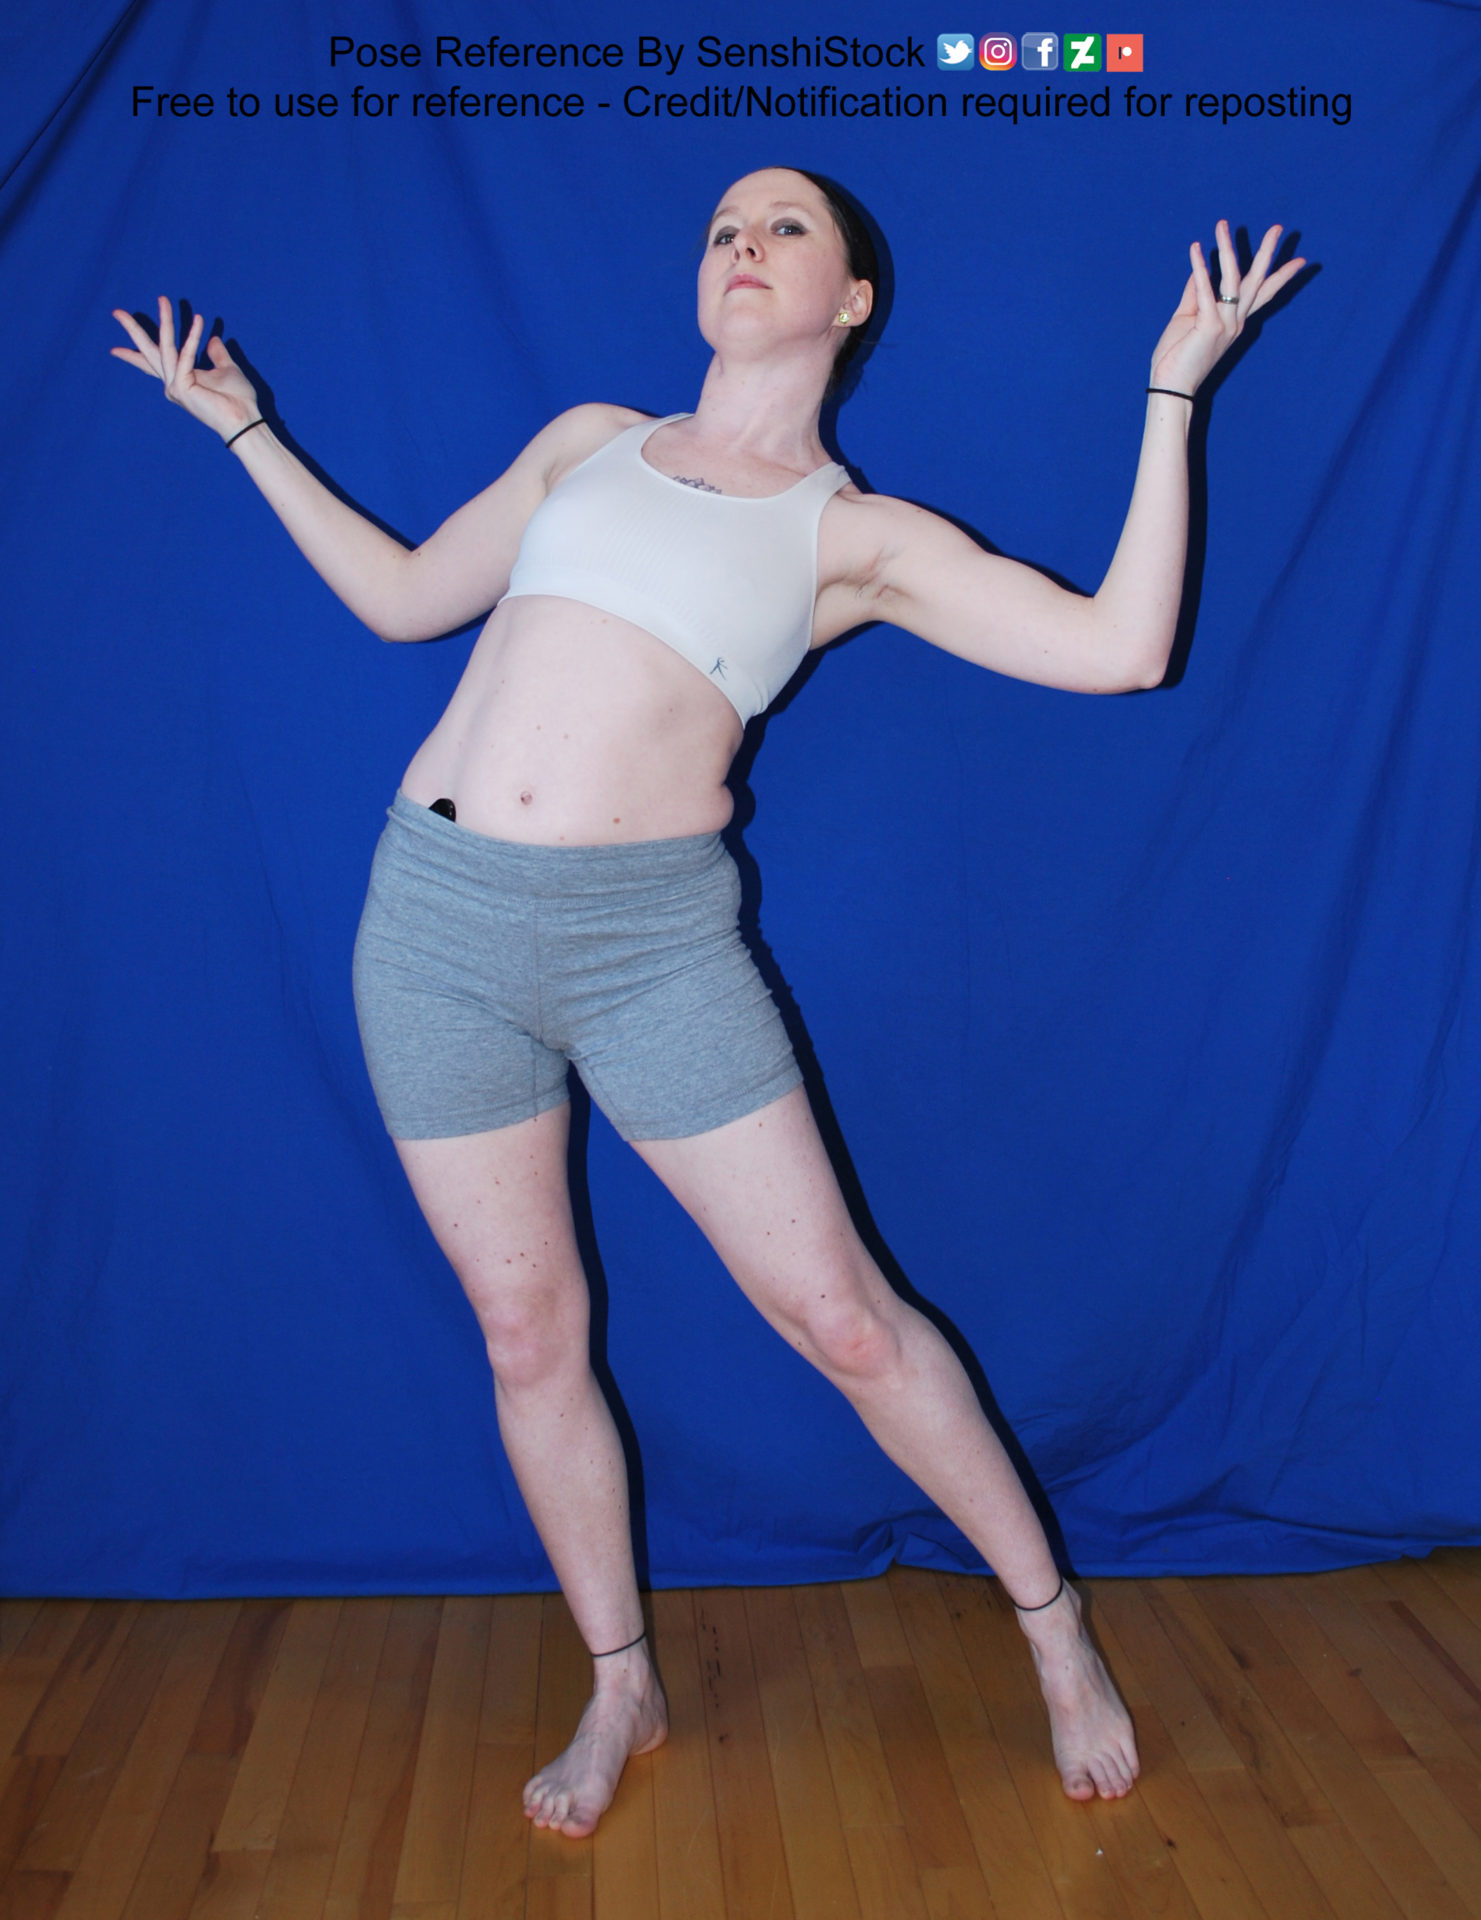 Thin, white female pose reference model in a dynamic, open arm gesture with weight shifted heavily to one foot